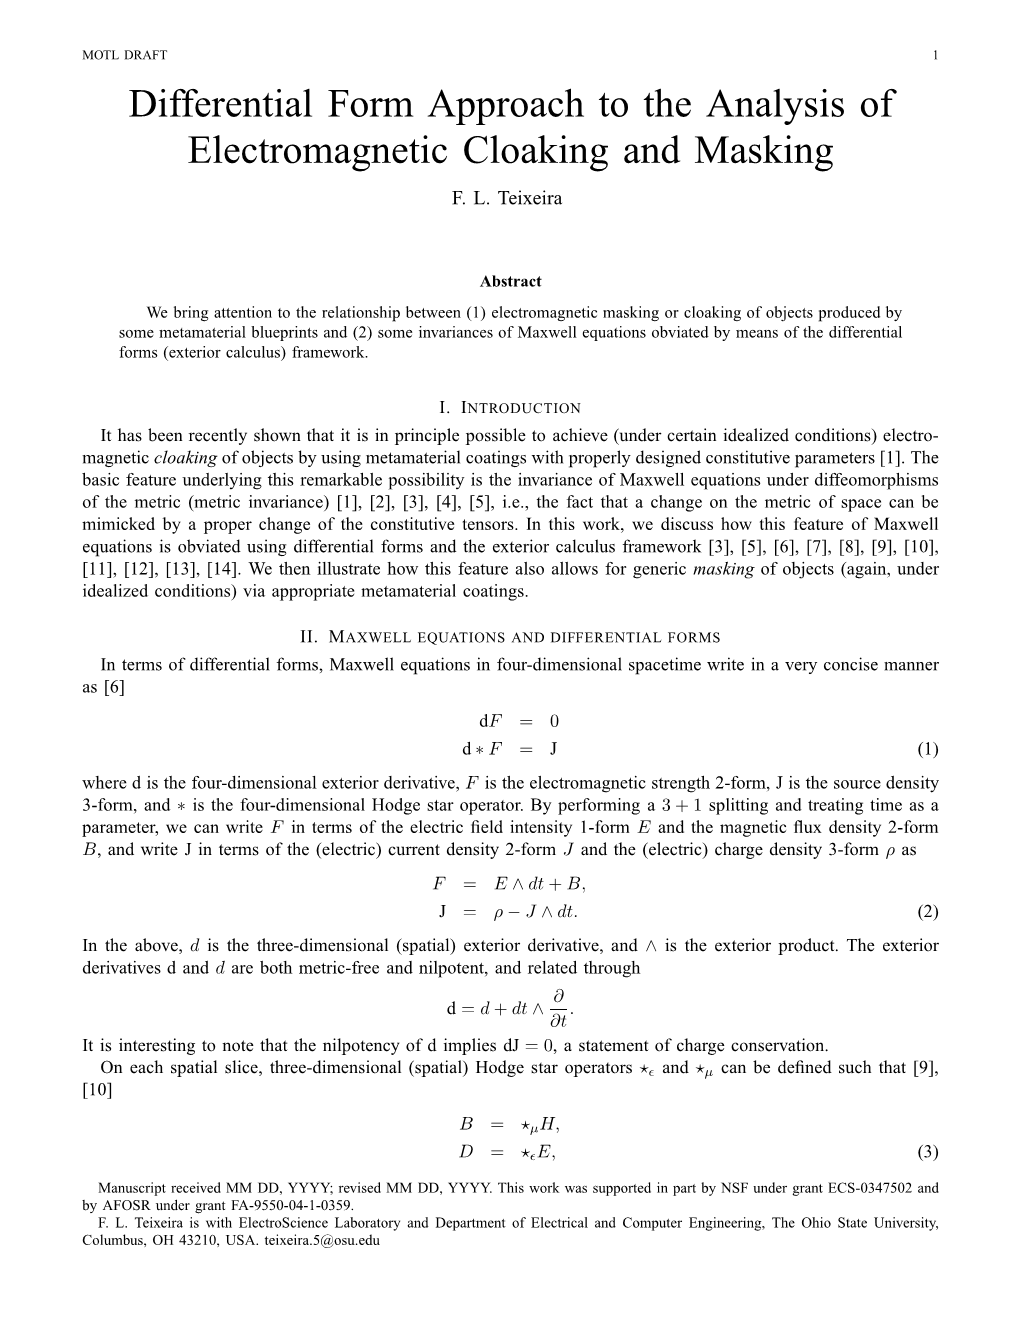 Differential Form Approach to the Analysis of Electromagnetic Cloaking and Masking F